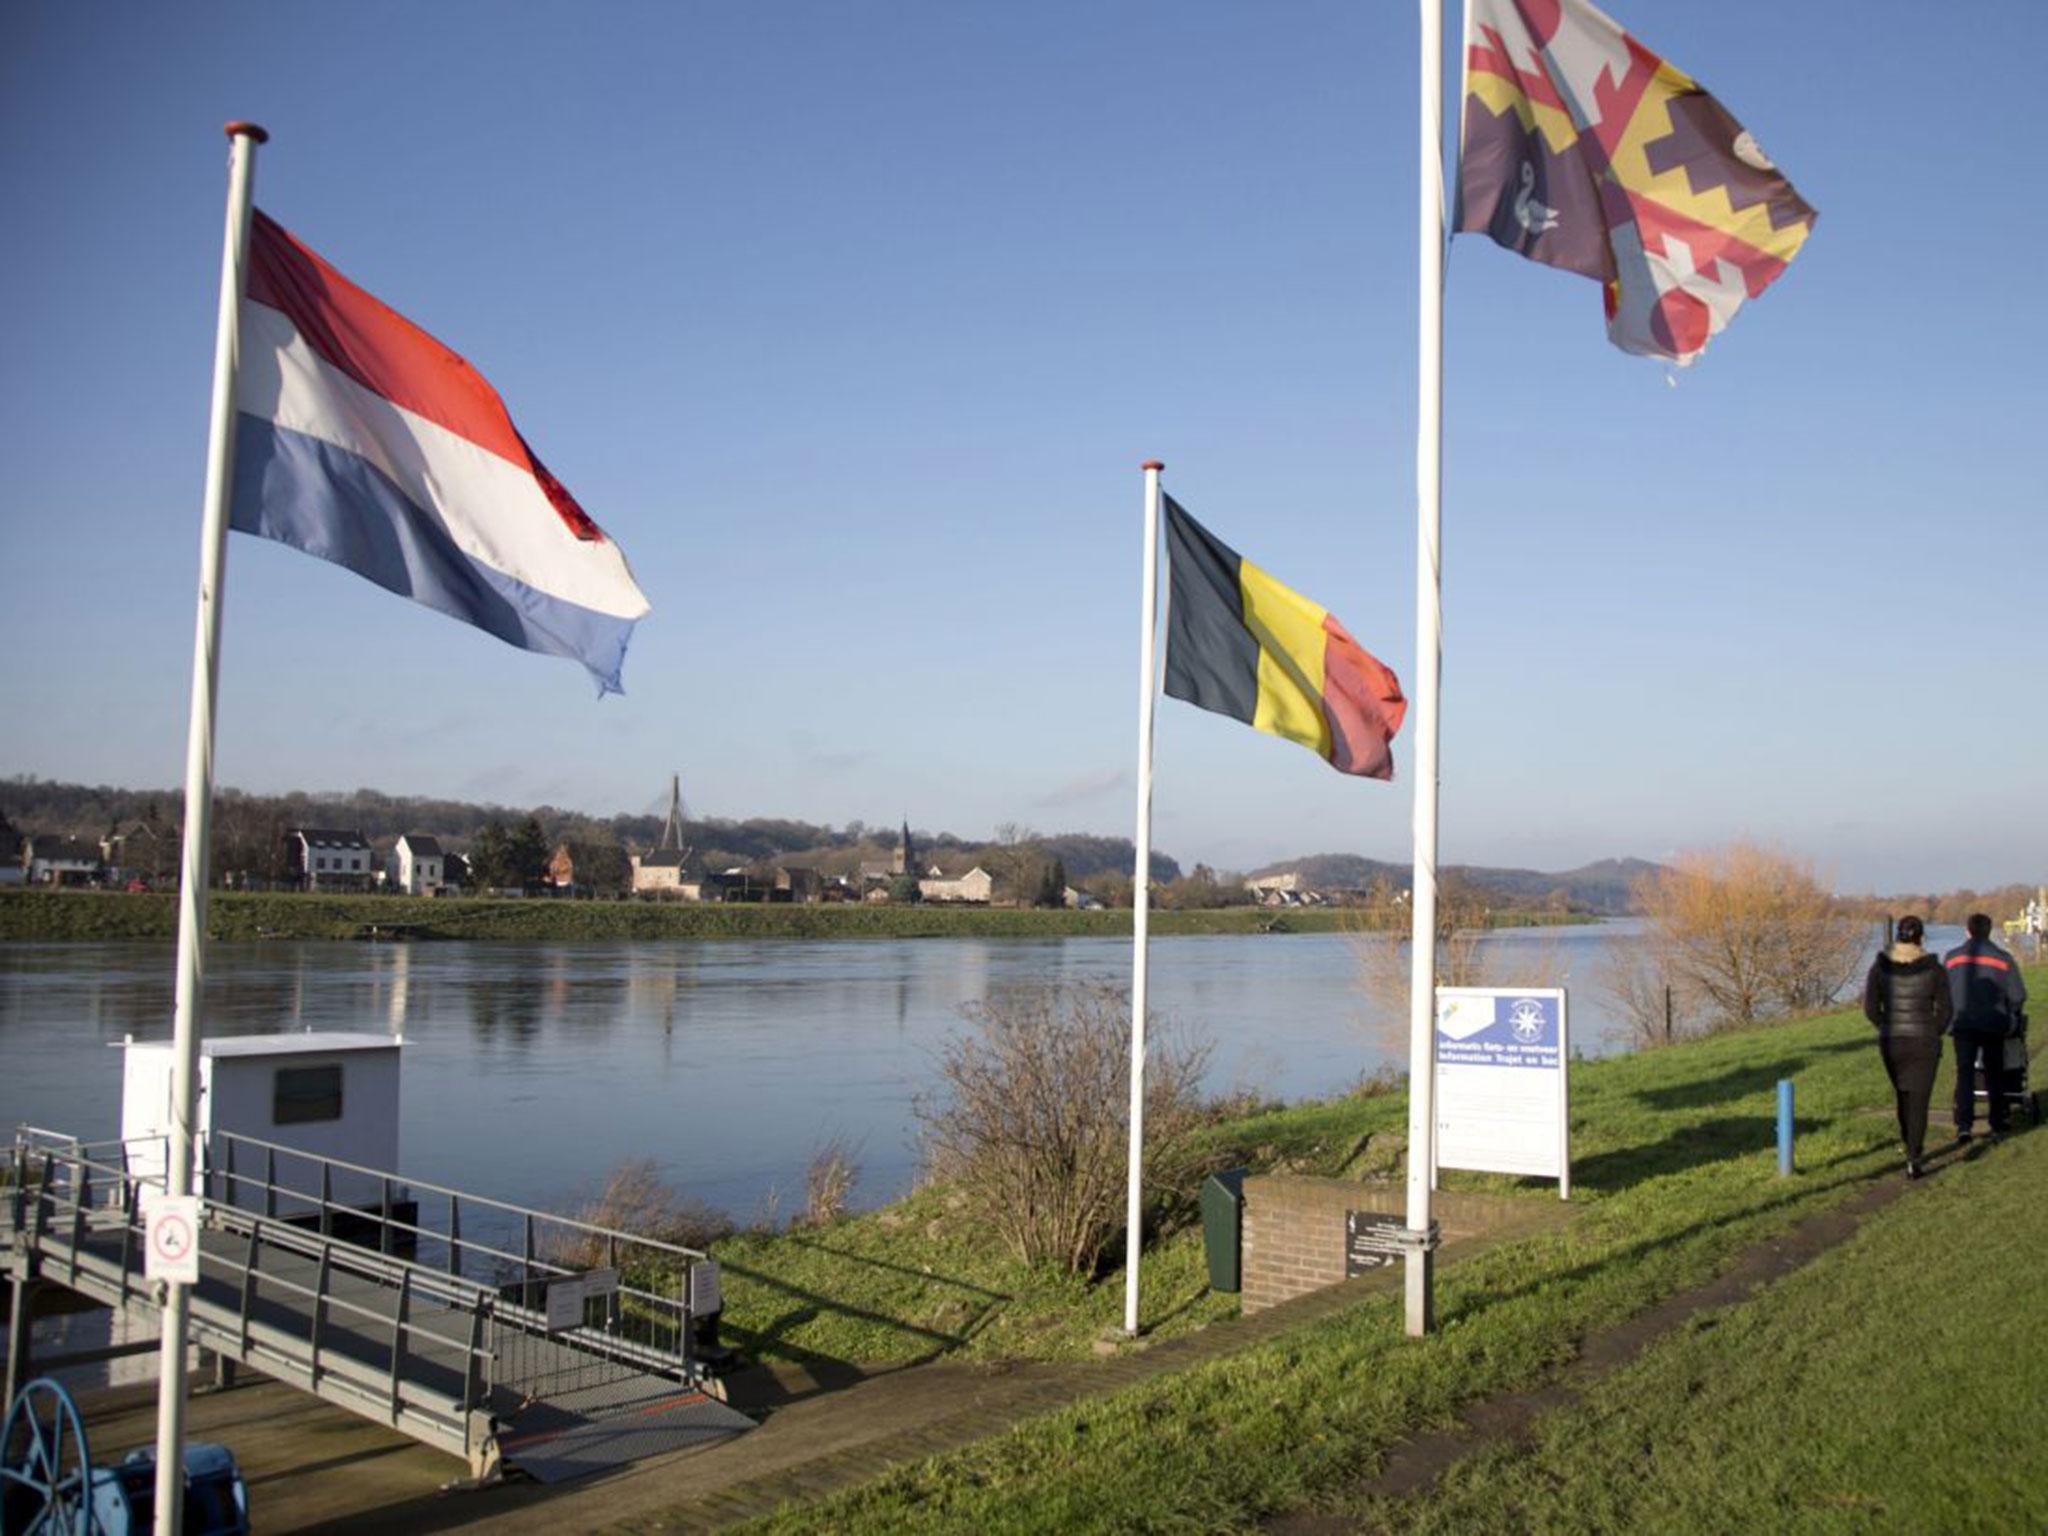 File photo showing the Dutch and Belgian flags on the waterfront in Eijsden, Netherlands